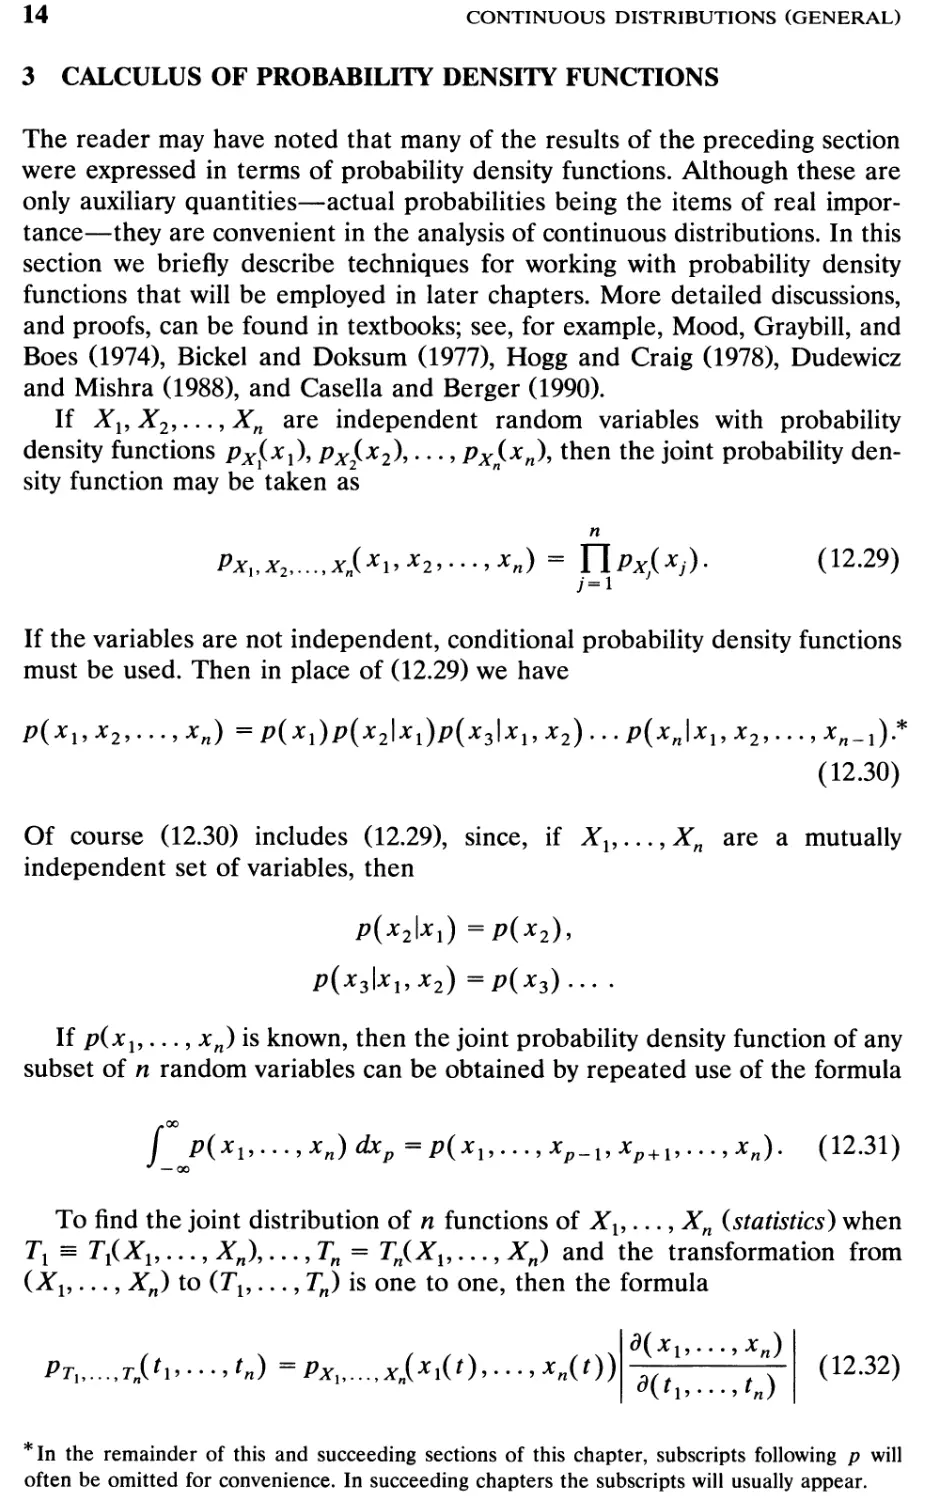 3 Calculus of Probability Density Functions, 14